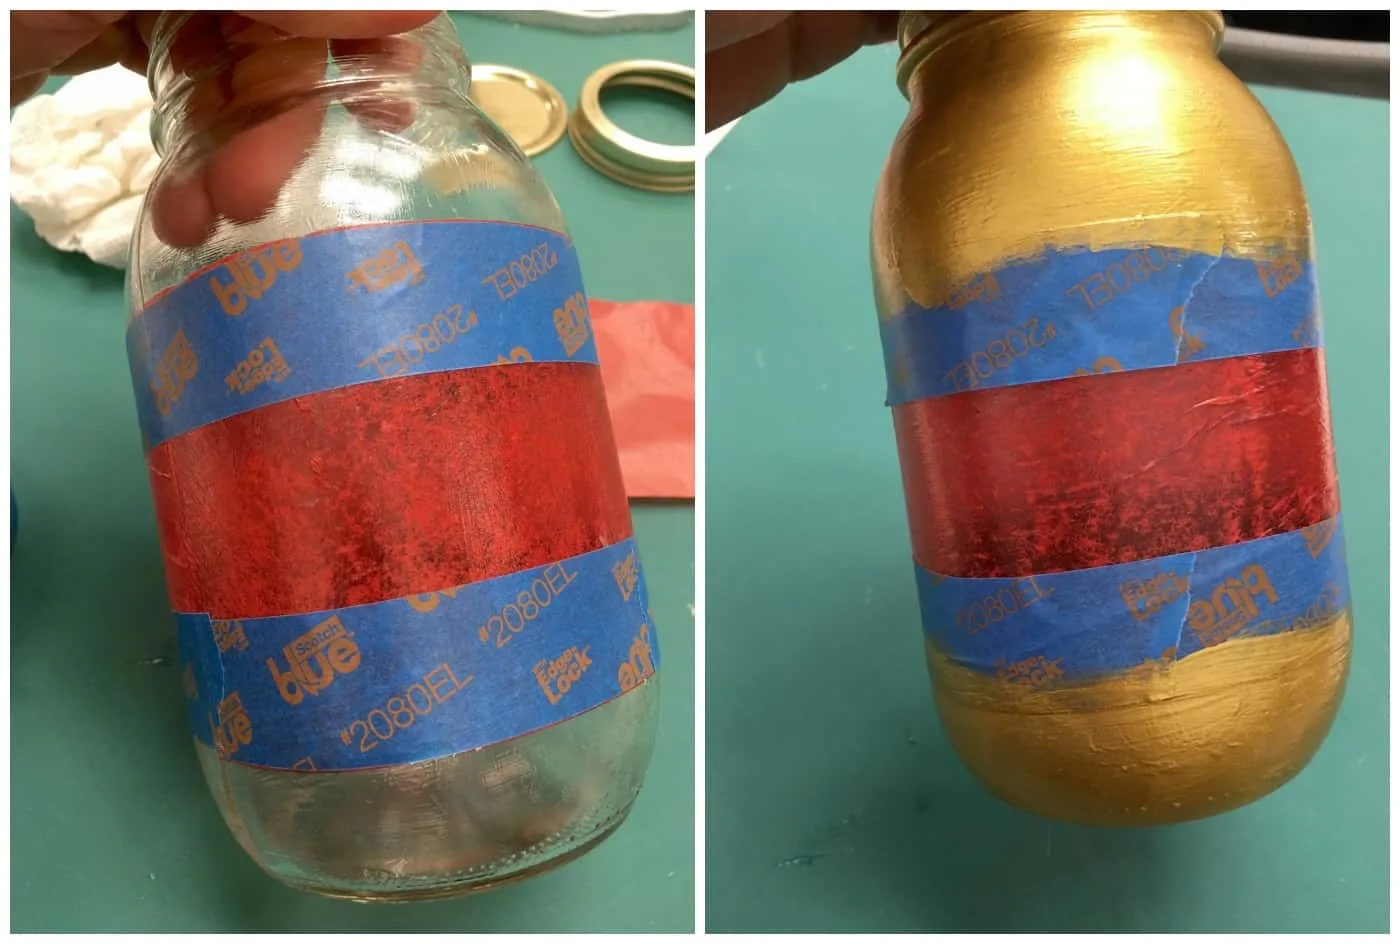 Taping off the jar with painter's tape and painting with gold paint